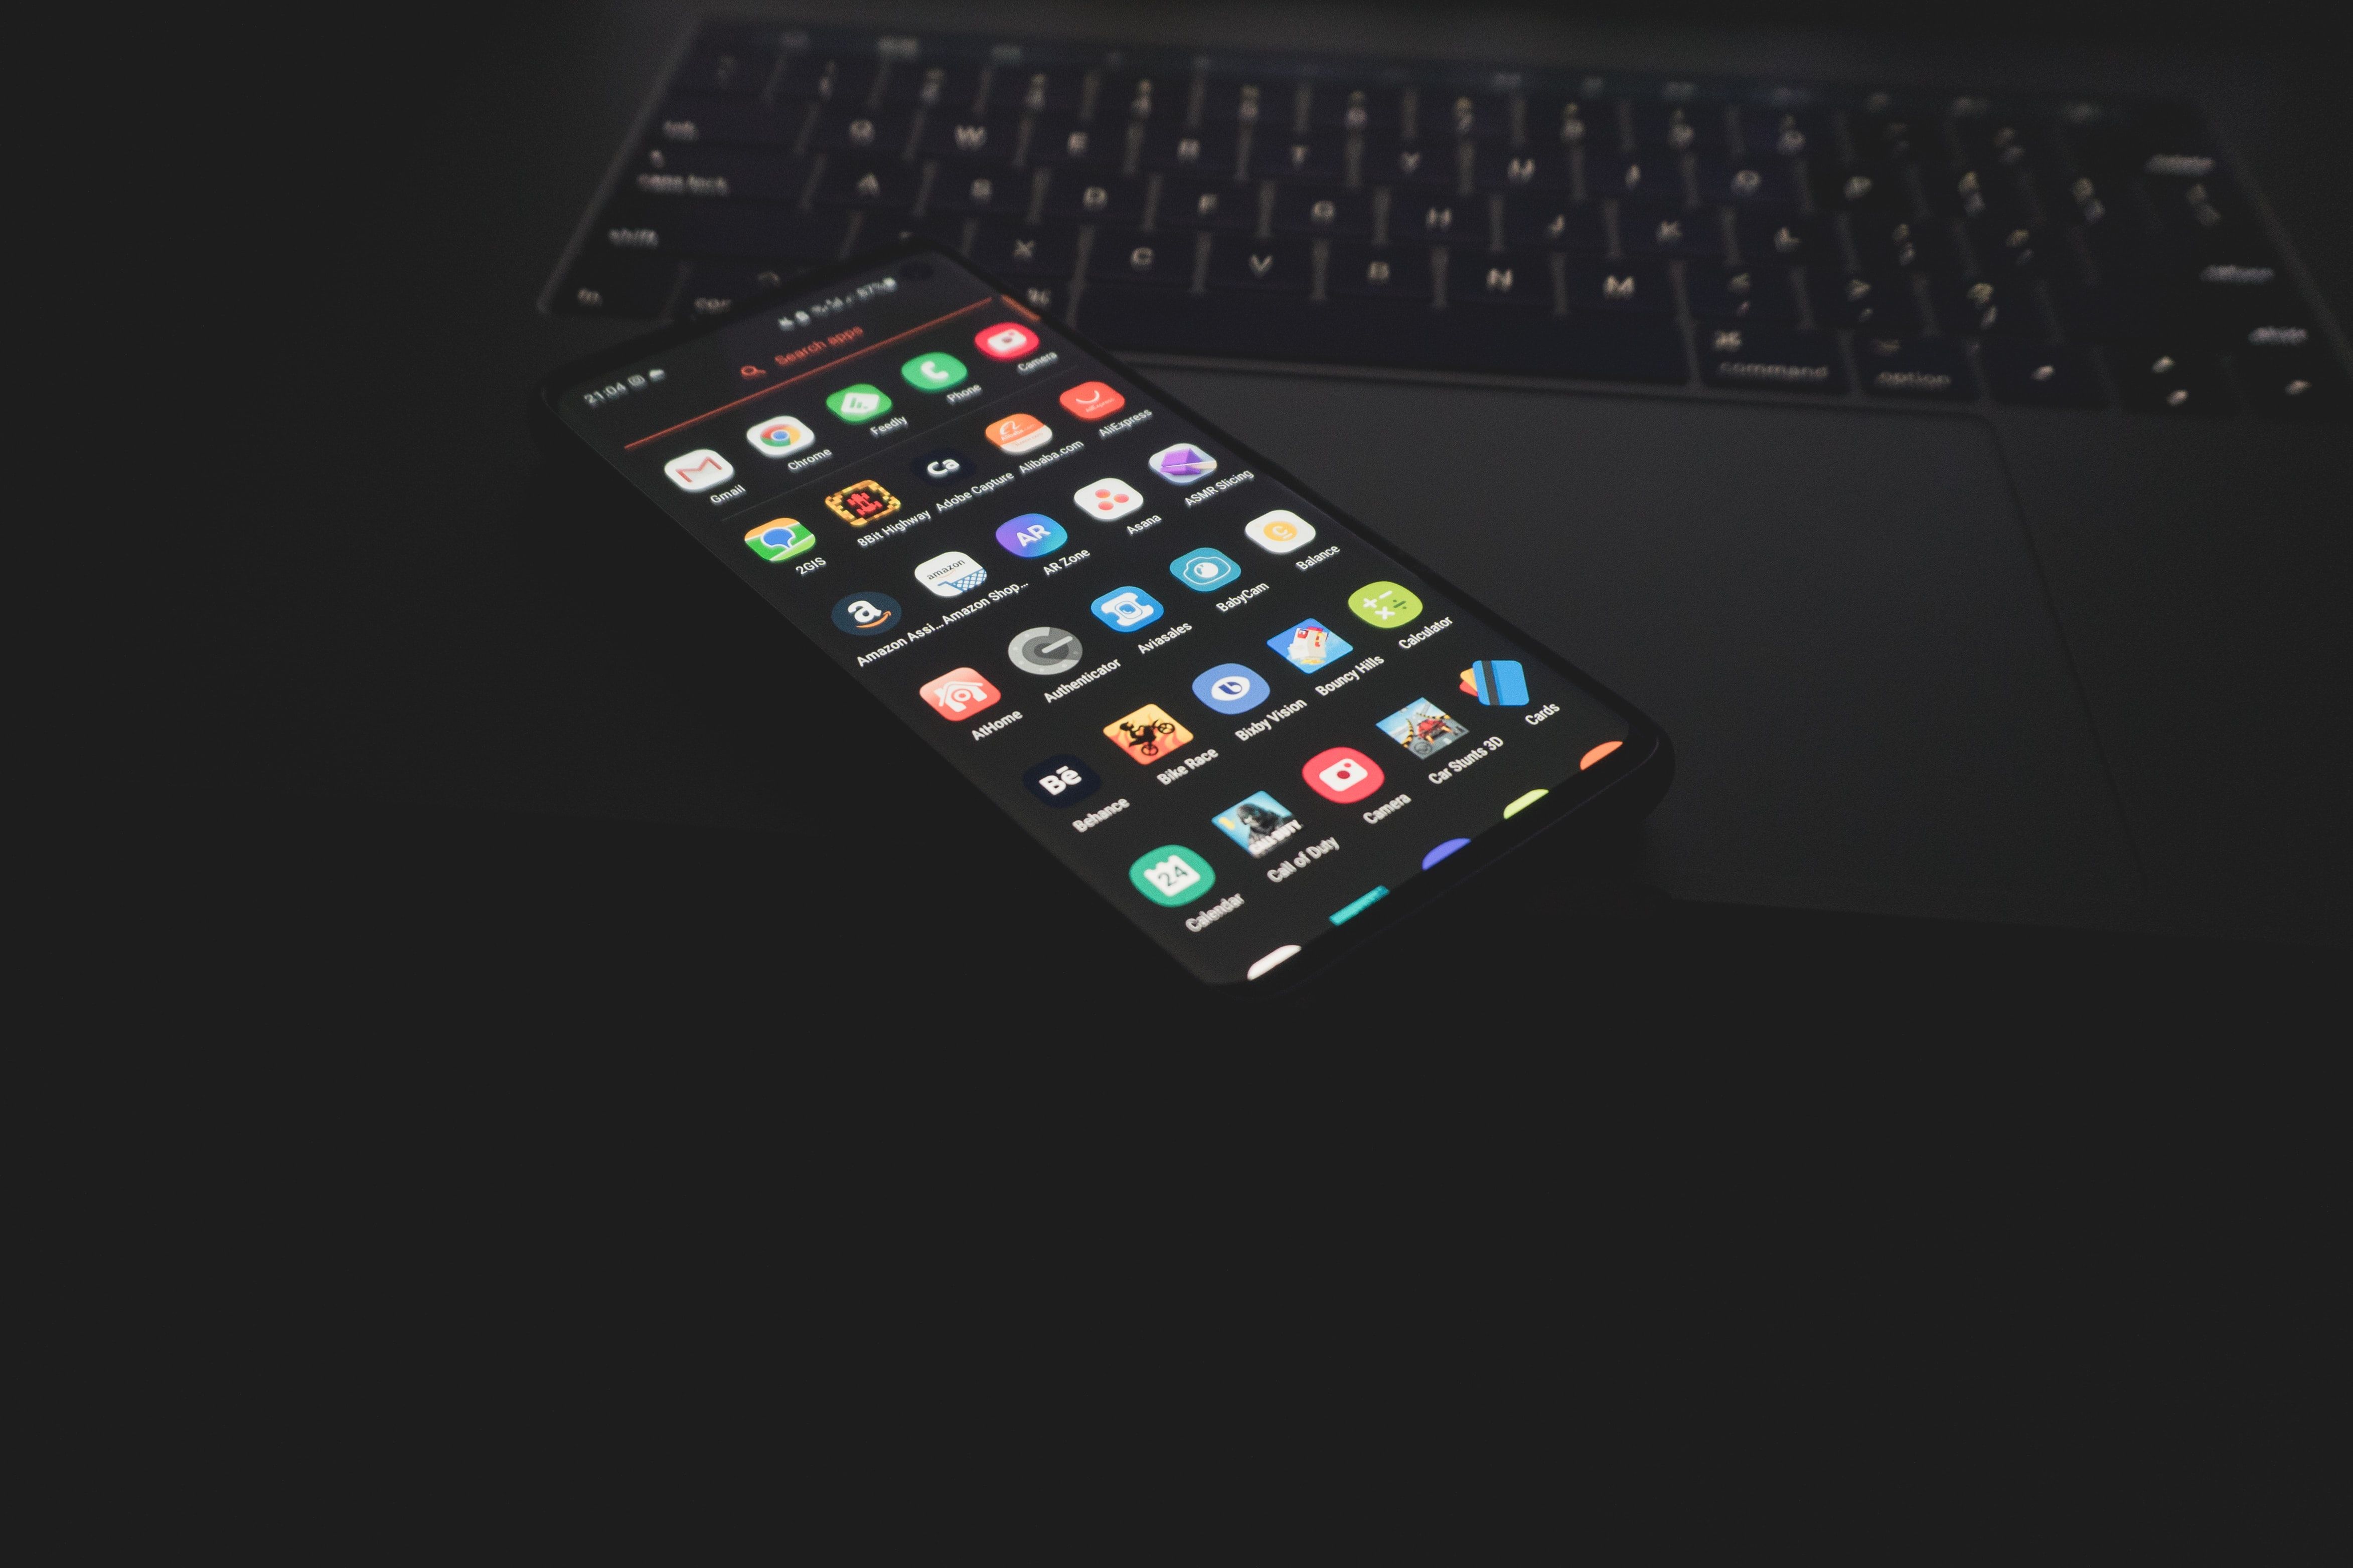 Image shows an Android phone open with app icons showing resting on top of a laptop trackpad.